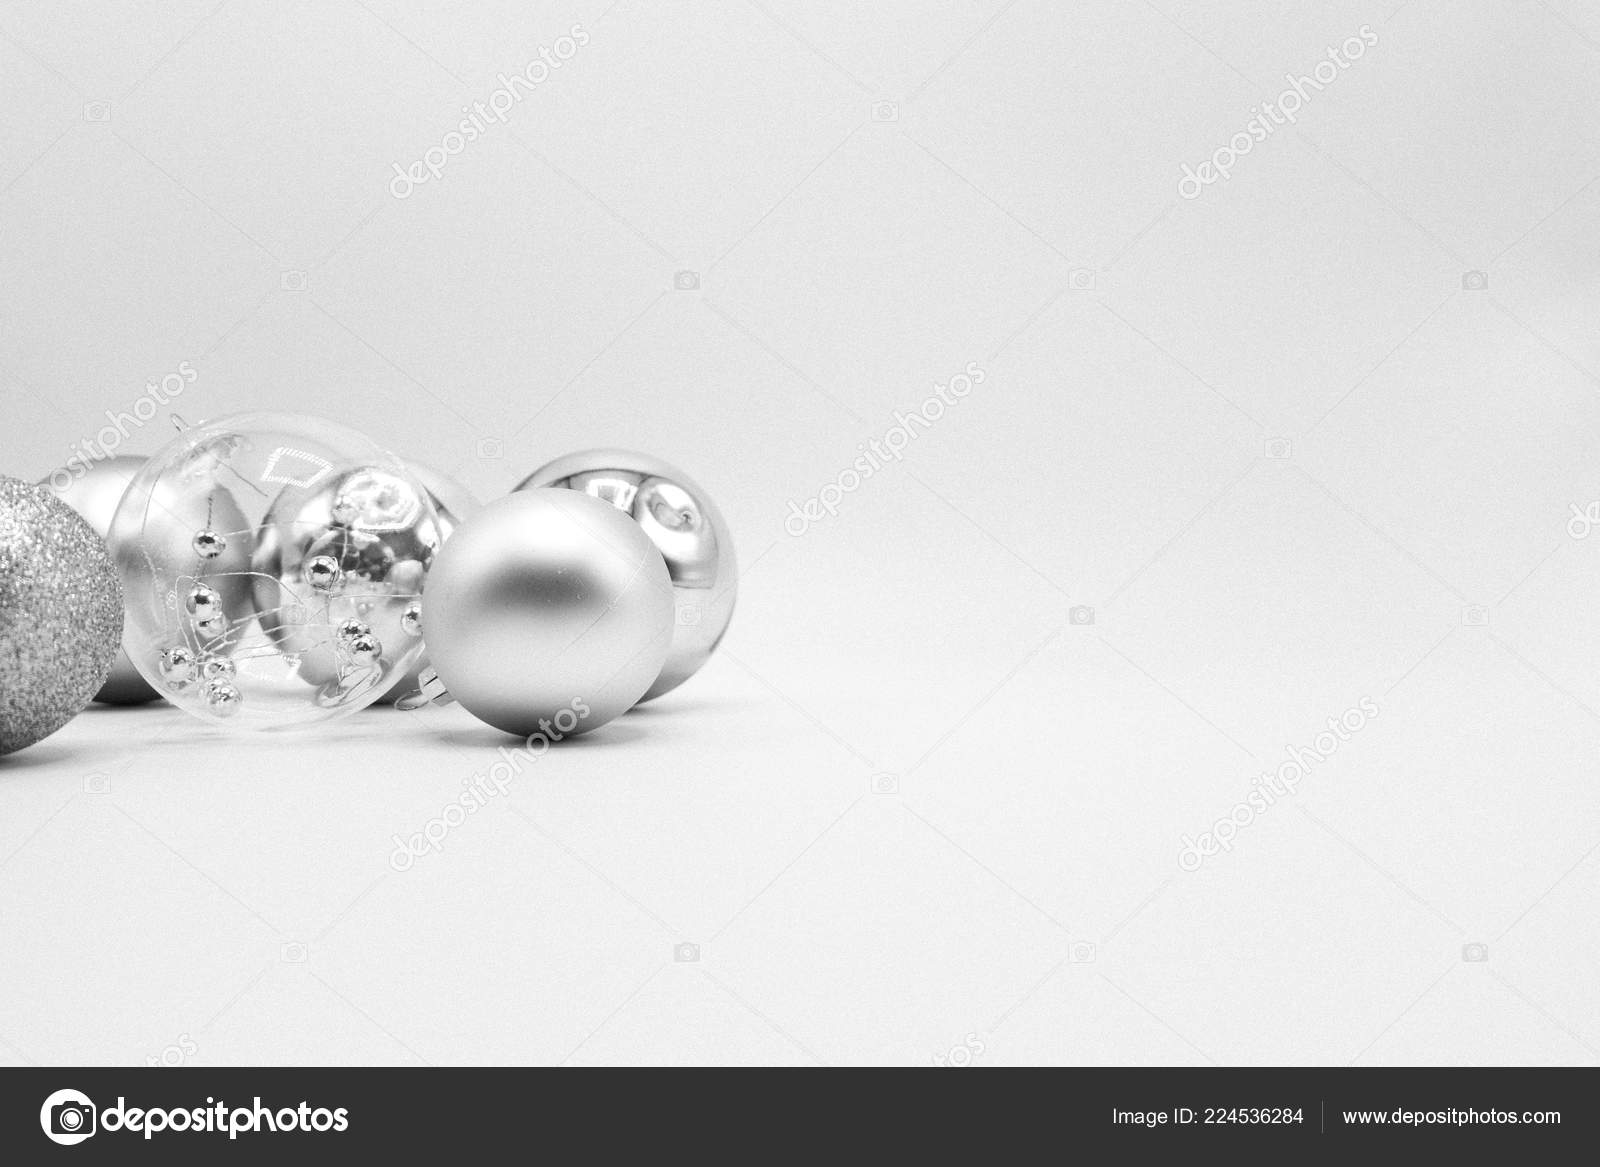 Silver Classy Christmas Background - HD Wallpaper 